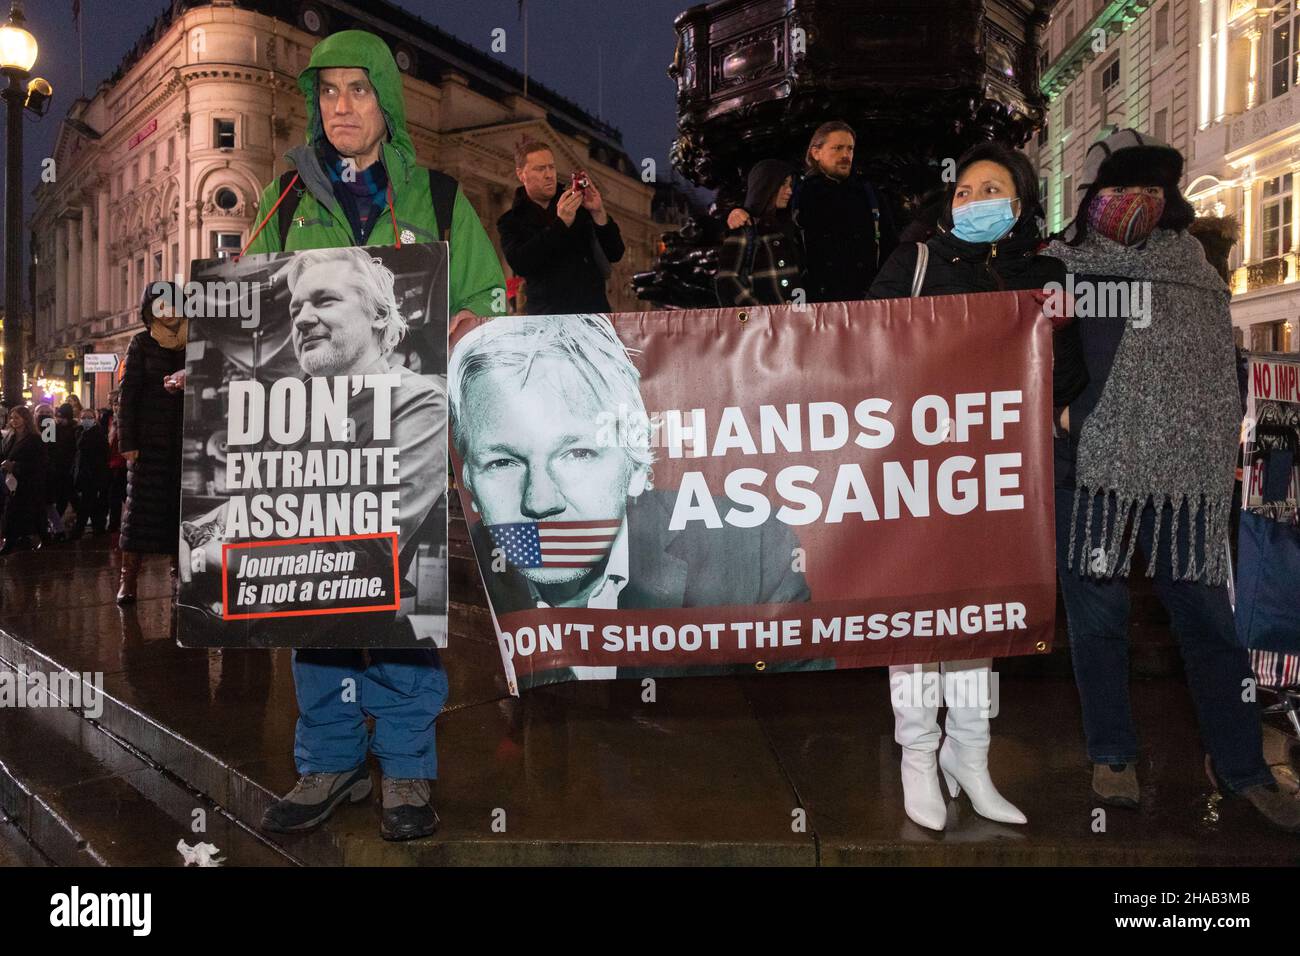 Protestors seen holding a banner that says 'Hands off Assange. Don't shoot the messenger' and a placard that says 'don't extradite Assange. Journalism is not a crime' during the demonstration. Julian Assange, an Australian journalist and founder of Wikileaks. In 2010, he published a series of leaks including correspondence and videos from military files. The files were supplied by then U.S. Army intelligence analyst Chelsea Manning. Since Assange's arrest in 2019, he has been incarcerated in Belmarsh Prison in London. Recently, the UK High Court ruled that Assange can be extradited to the US. Stock Photo